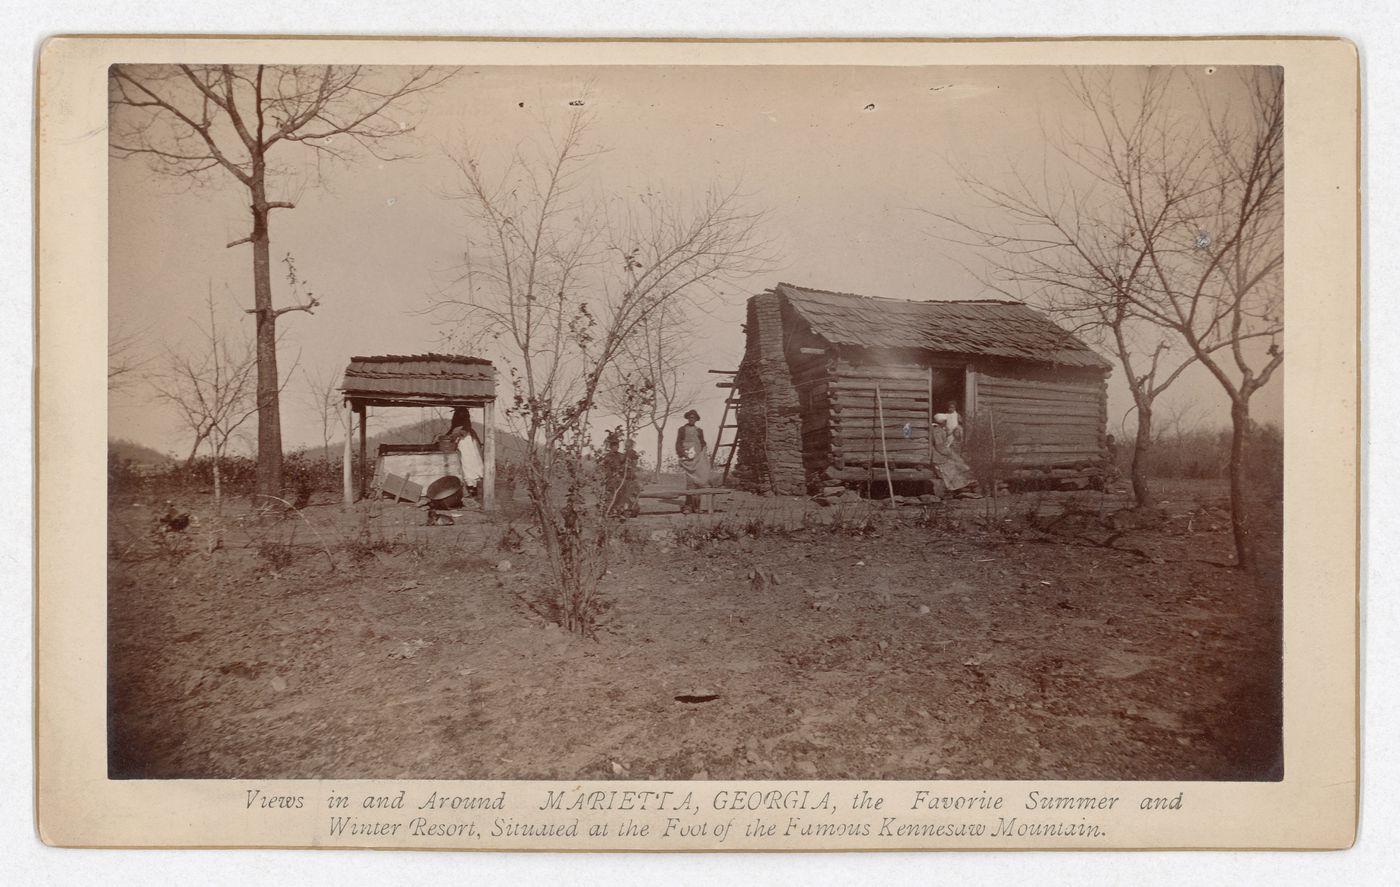 View of African American people and log cabin they live in, with covered well on the left, Marietta, Georgia, United States